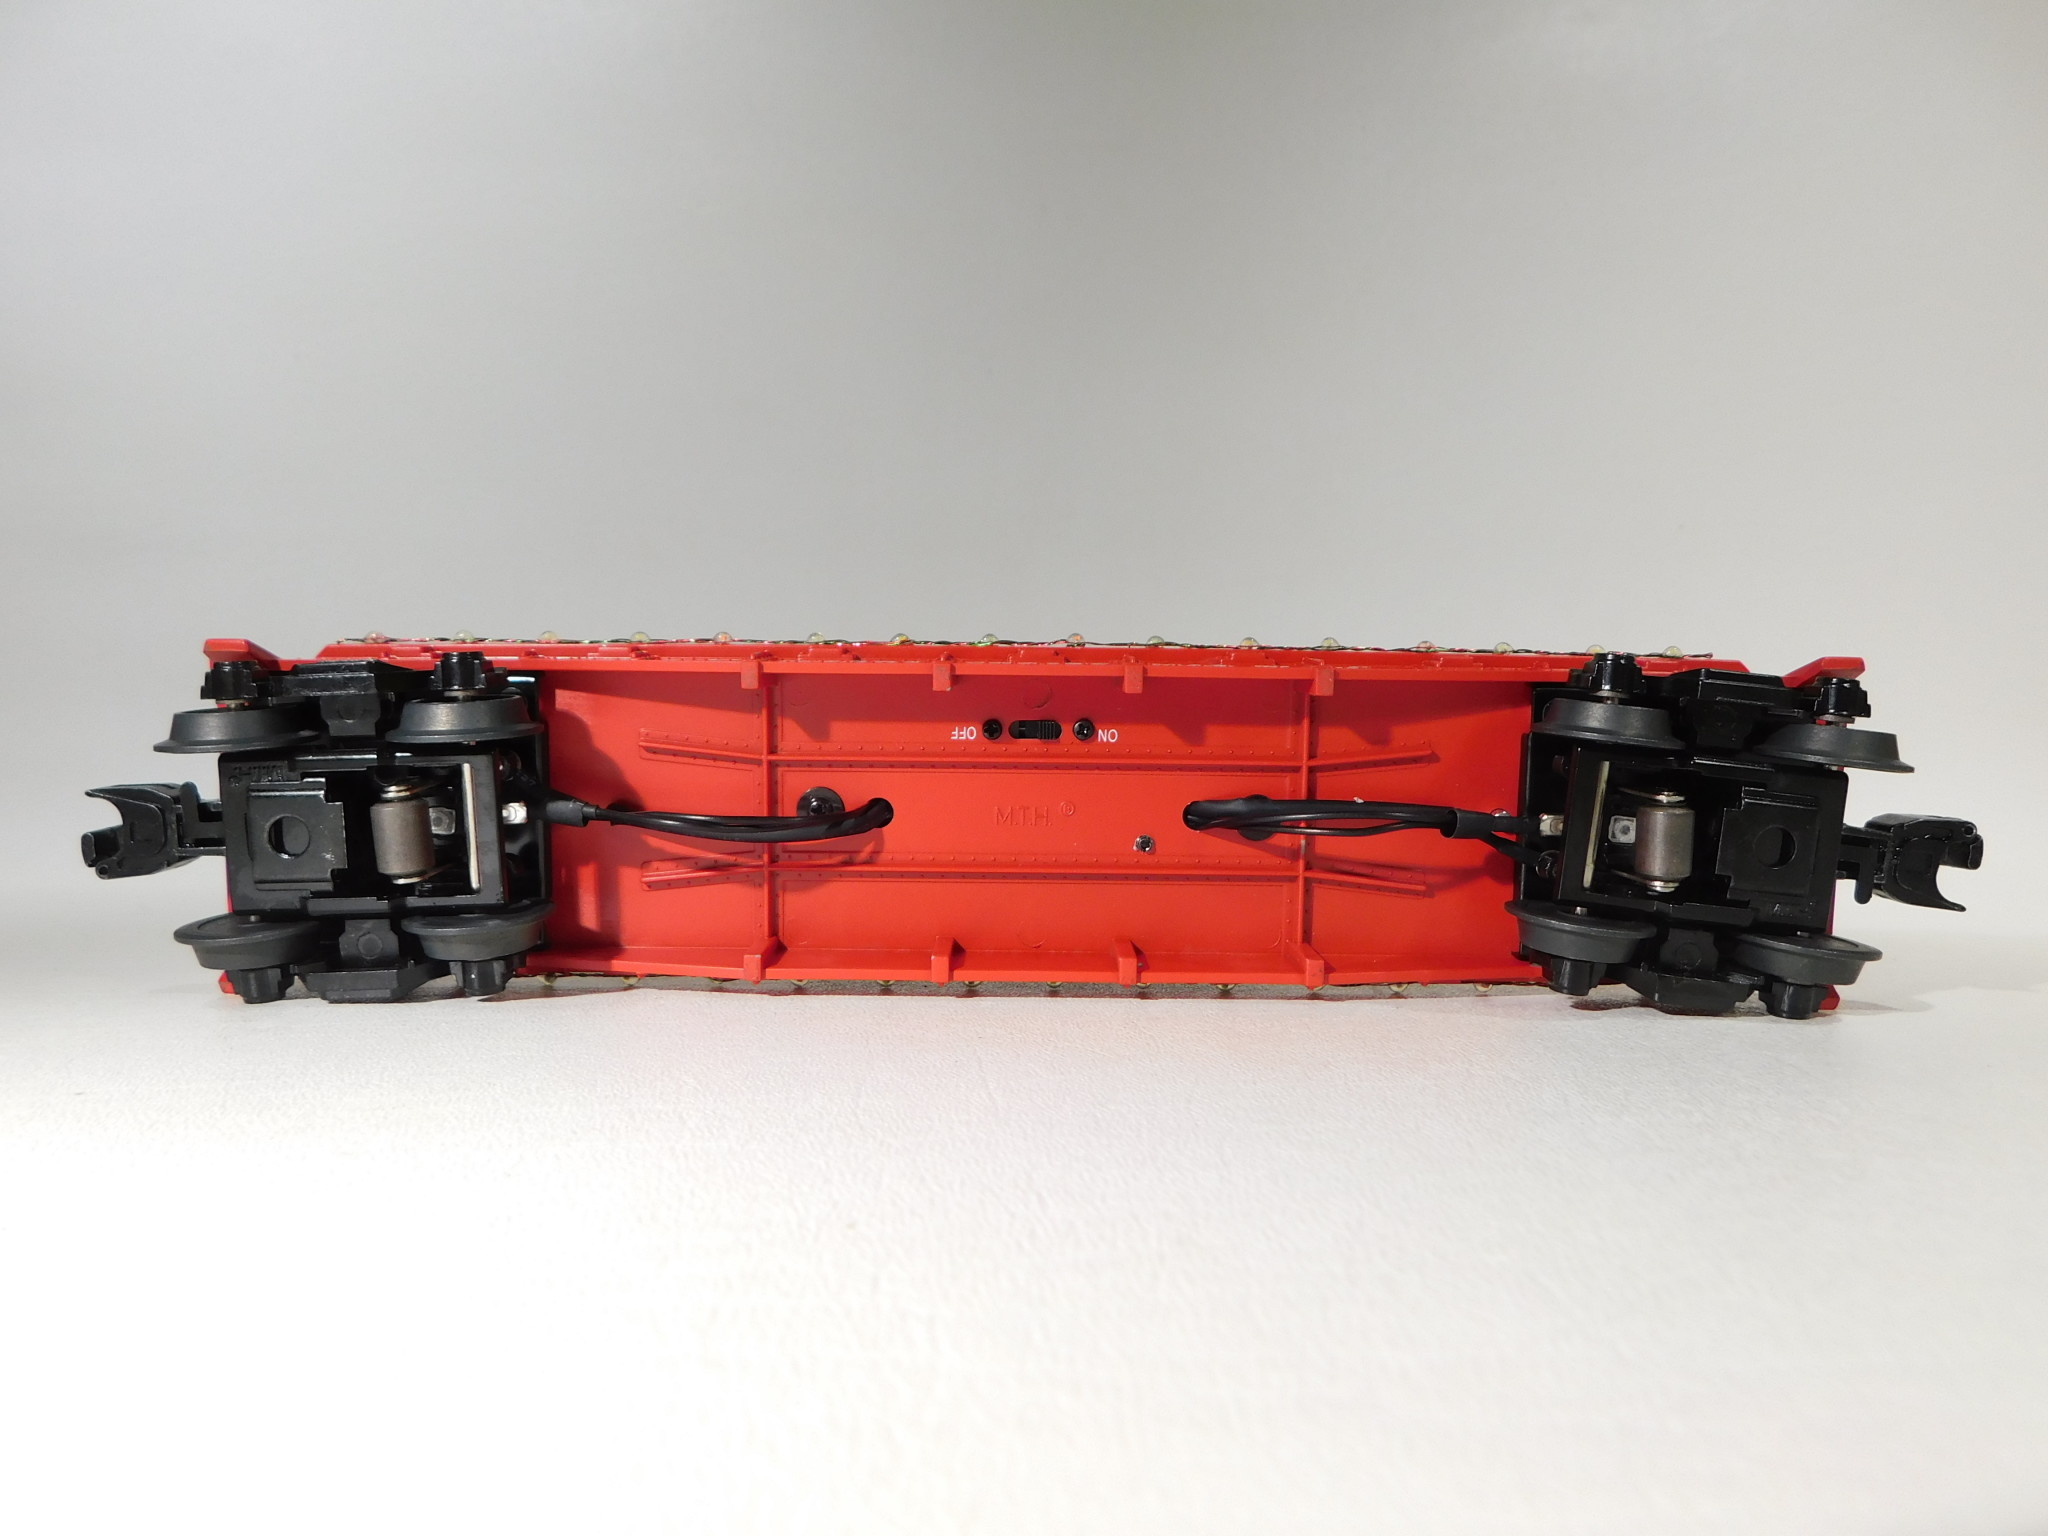 MTH 30-76821 Flatcar With Lighted Christmas Trees RAILKING O Gauge 3 Rail for sale online